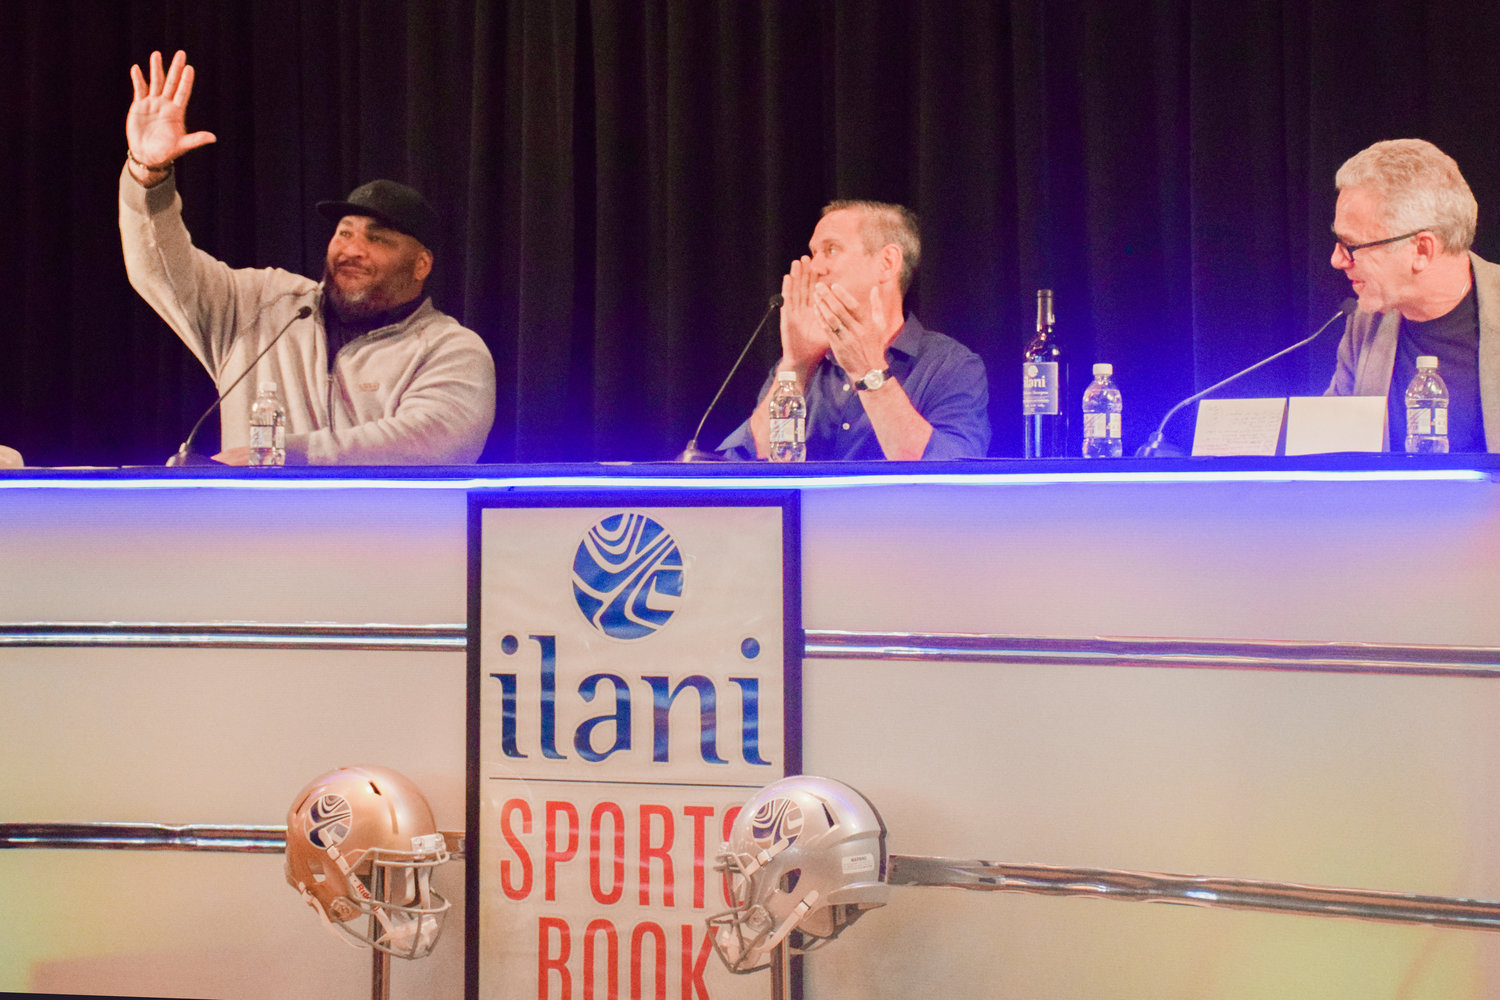 From left, former Seahawks offensive tackle and NFL hall of famer Walter Jones, former NFL quarterback and Washington State University alum Drew Bledsoe, and sportscaster Neil Everett take part in a question and answer session during a grand opening for sports betting at ilani Nov. 6.